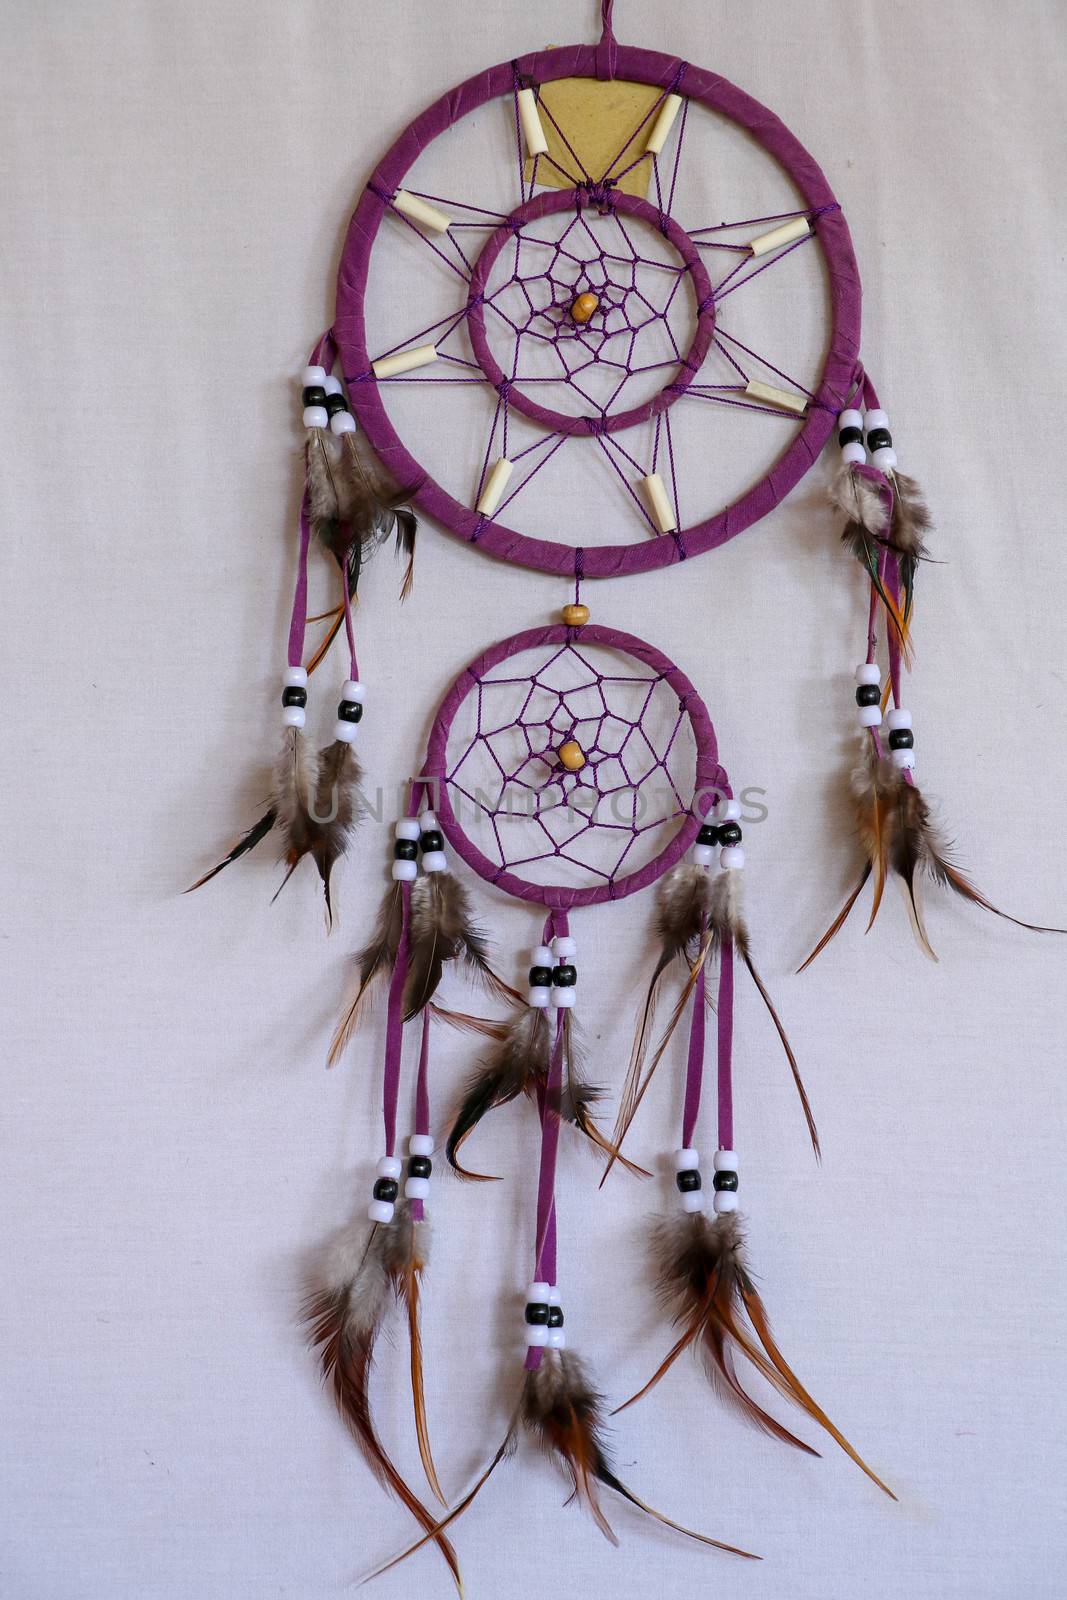 Red black and purple Dreamcatcher with bat made of feathers leather beads and ropes, hanging on the white background.